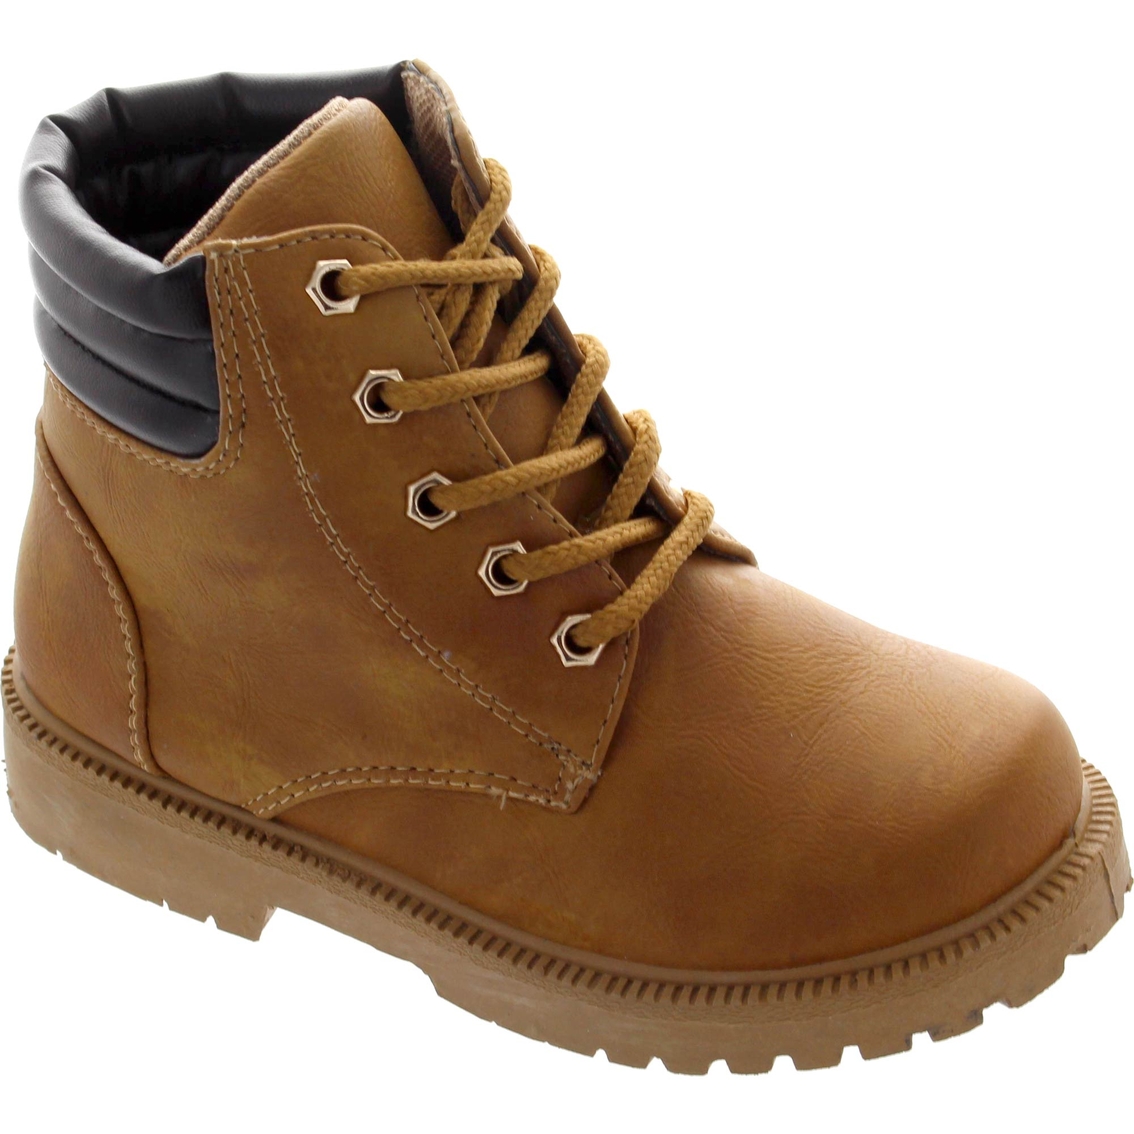 Rugged Bear Boys Work Boots | Boots | Shoes | Shop The Exchange